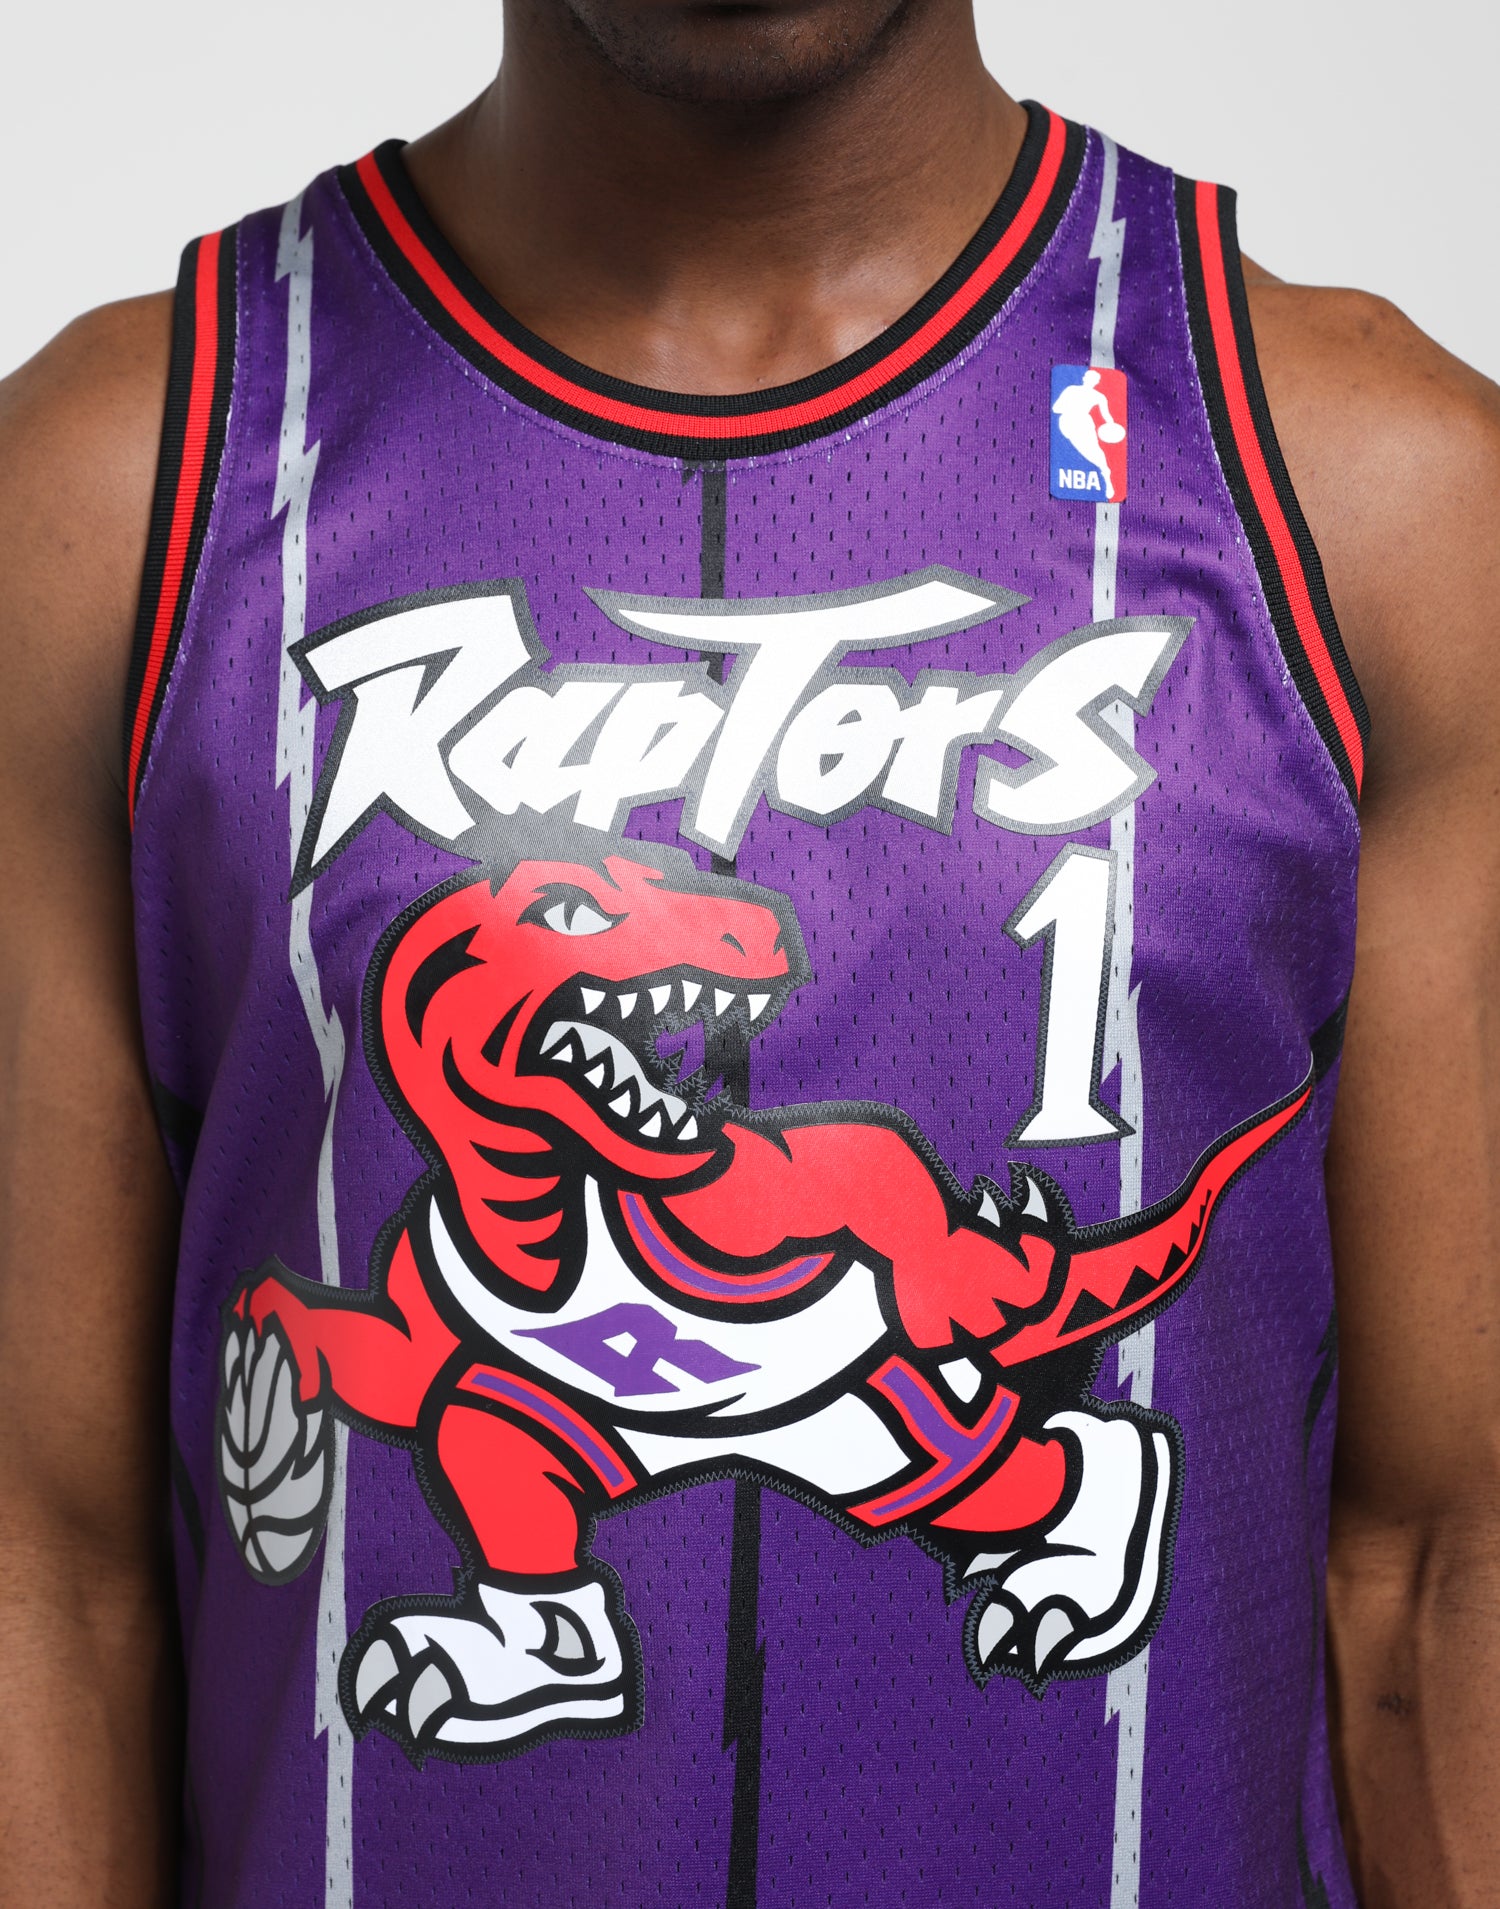 red and purple jersey